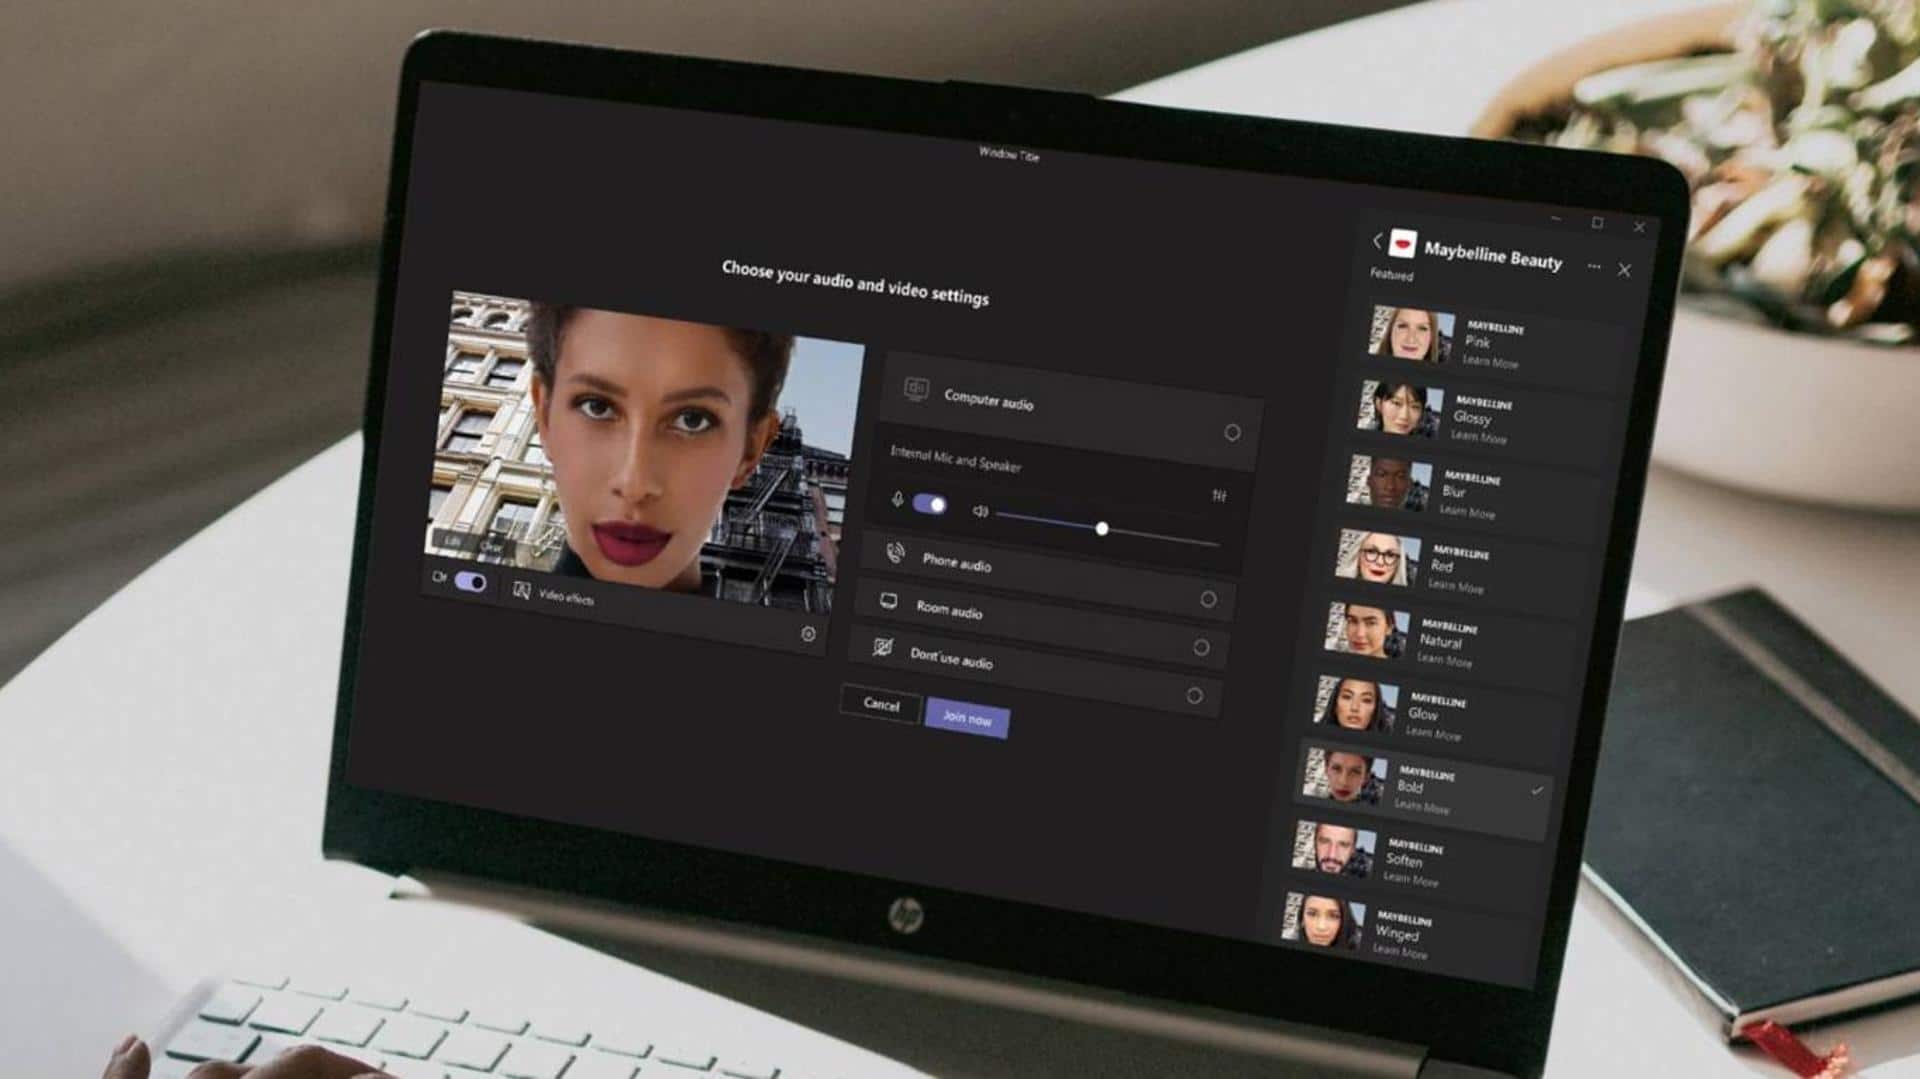 Announcing the New Maybelline Beauty App in Microsoft Teams - Microsoft  Community Hub